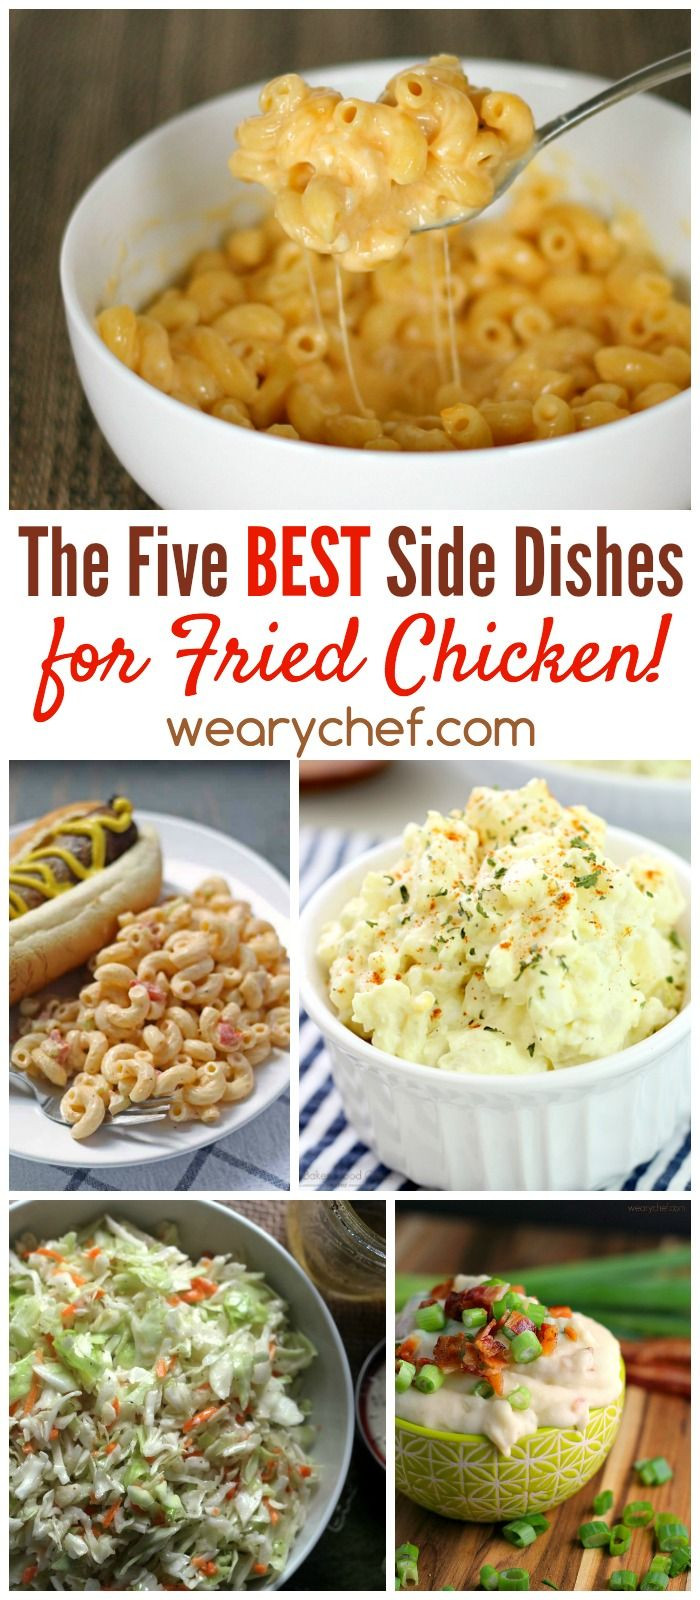 Healthy Side Dishes For Chicken
 Everyone loves fried chicken but you need one of these